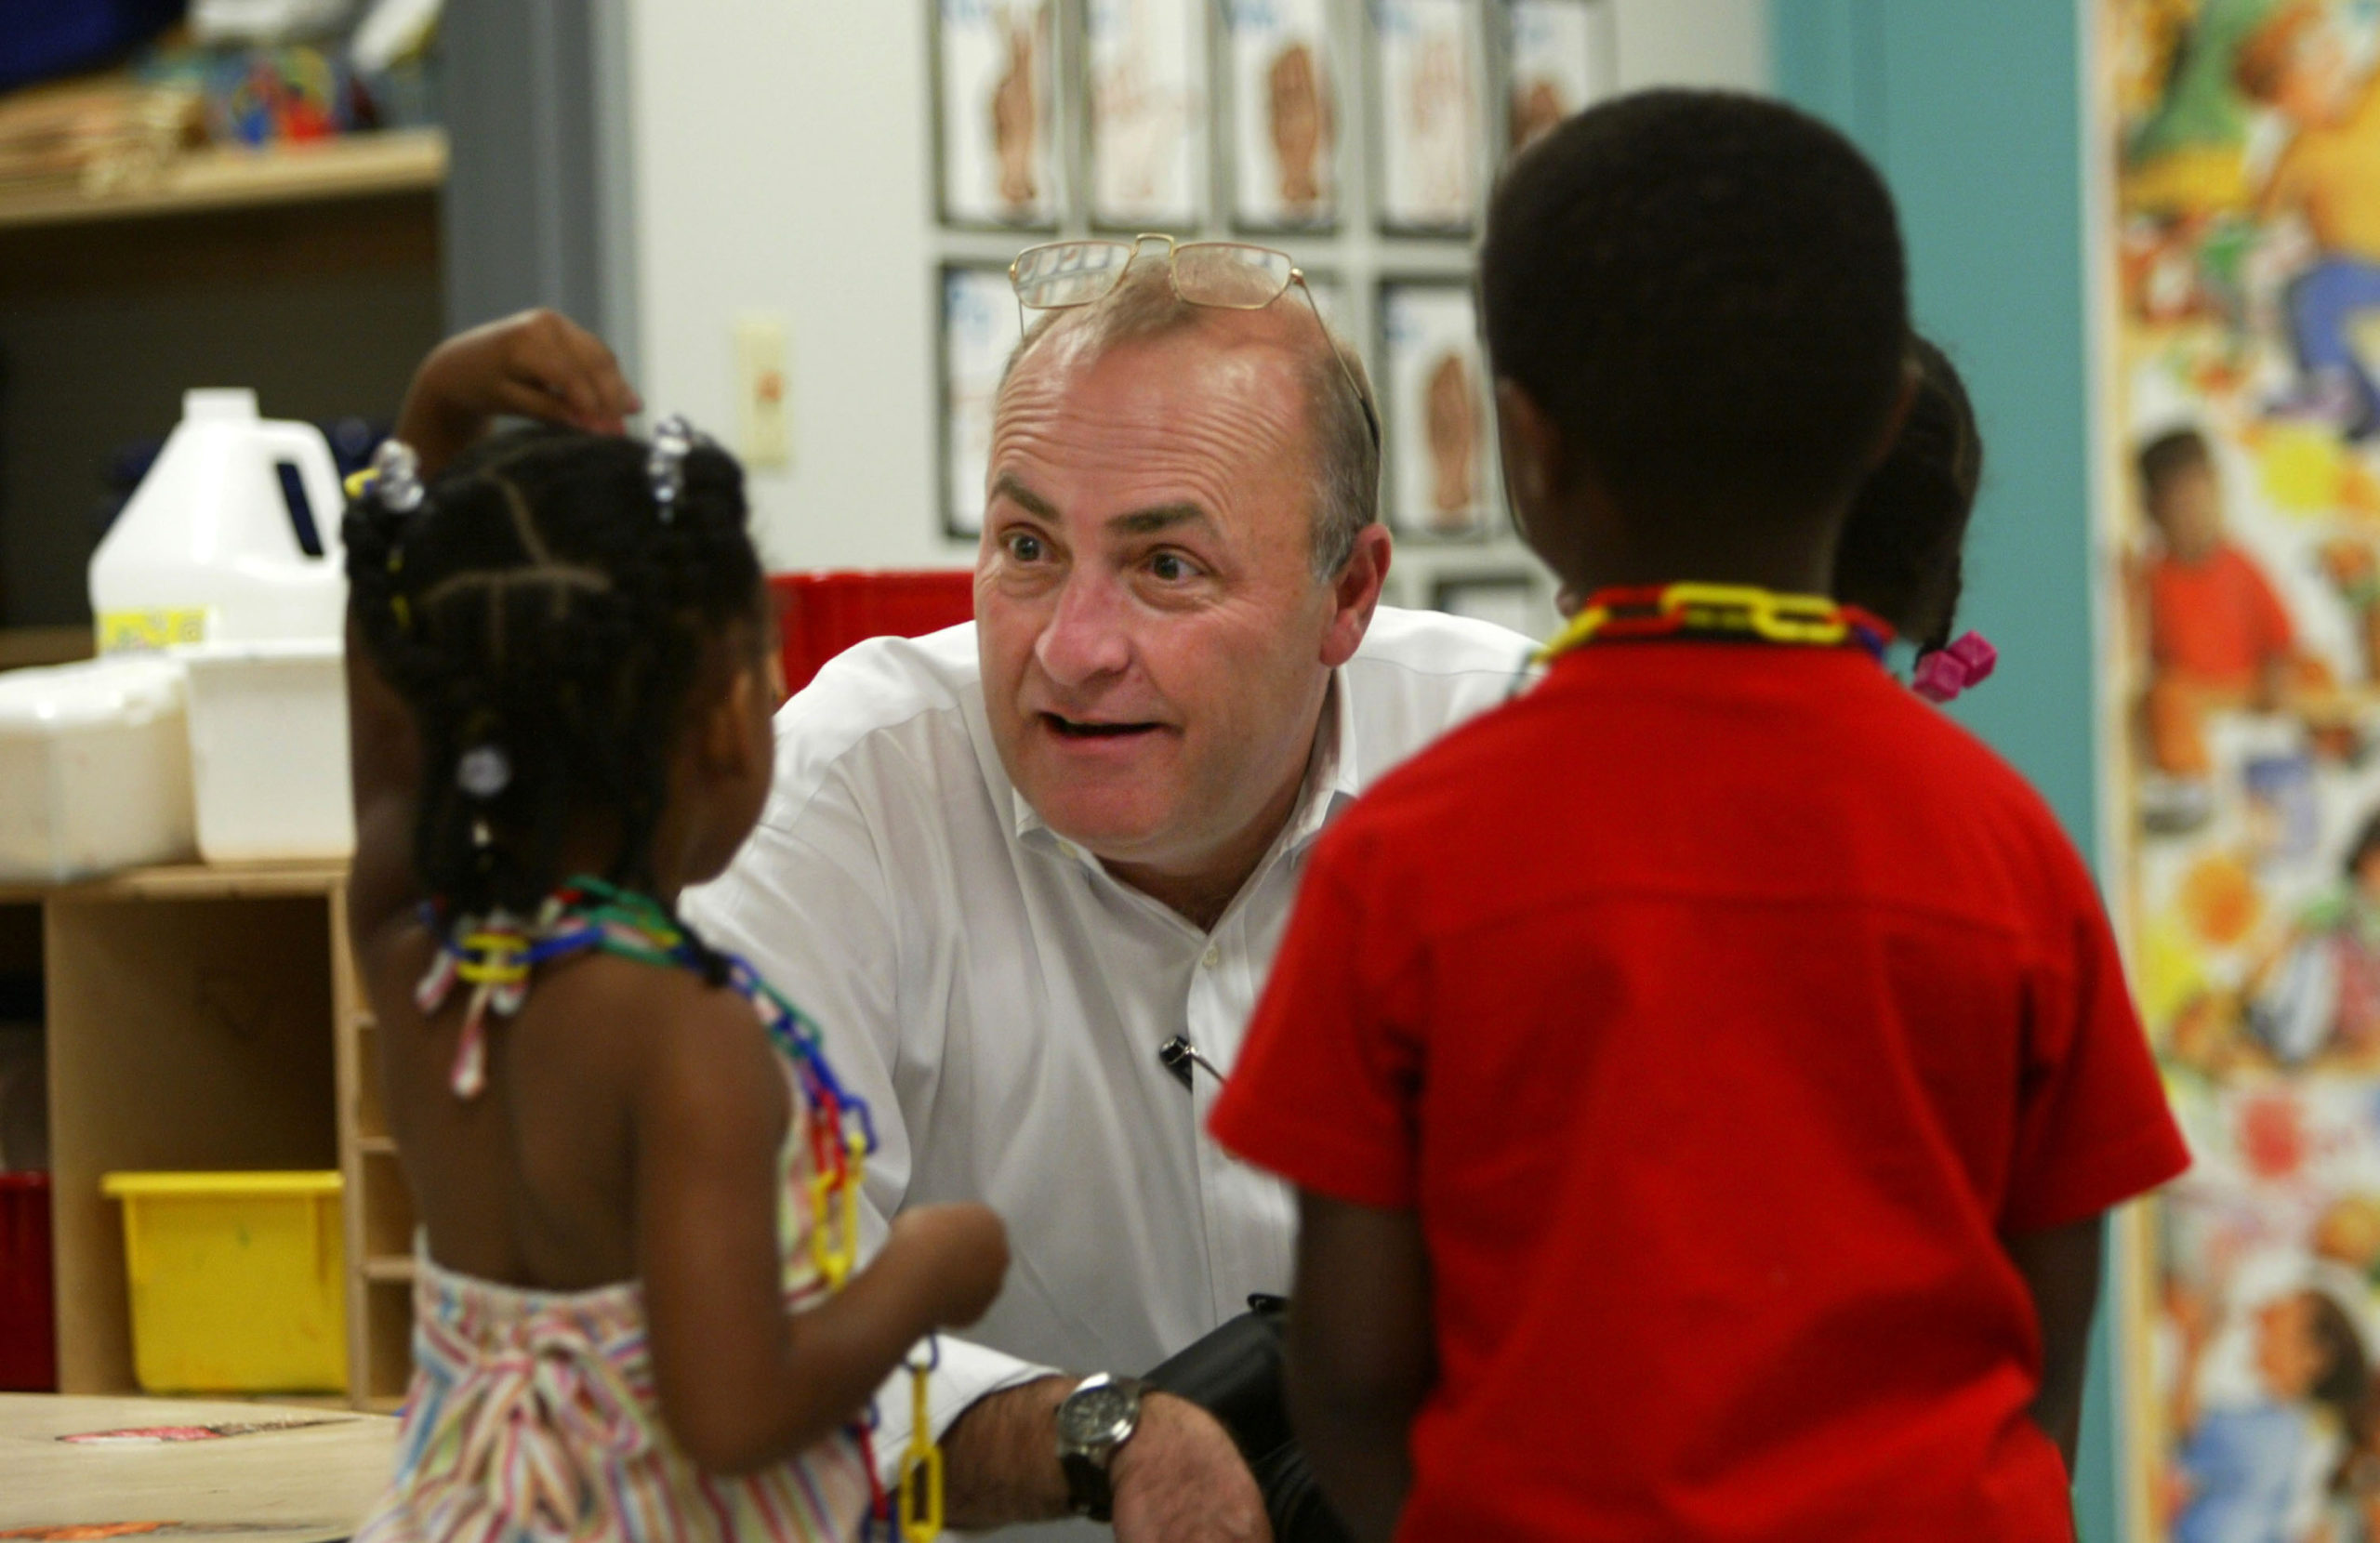 Robert Grom, president of Heritage Health Foundation, chats with children at the 4 Kids Early Learning Center August 24, 2004 in Braddock, Pennsylvania. The center is funded mostly by The Heinz Endowments. The average family income of children at the center is about $13,000 a year. The H.J. Heinz Co., based in Pittsburgh, once was one of the former industrial center's major employers. Now, Heinz's manufacturing has gone global and the impact on Pittsburgh is less. The Heinz family and its namesake foundation are no longer tied to the company, but their influence lives on, through philanthropy and the involvement of John Kerry's wife, Teresa Heinz Kerry, the widow of the late U.S. Senator H. John Heinz III. (Photo by Chris Hondros/Getty Images)